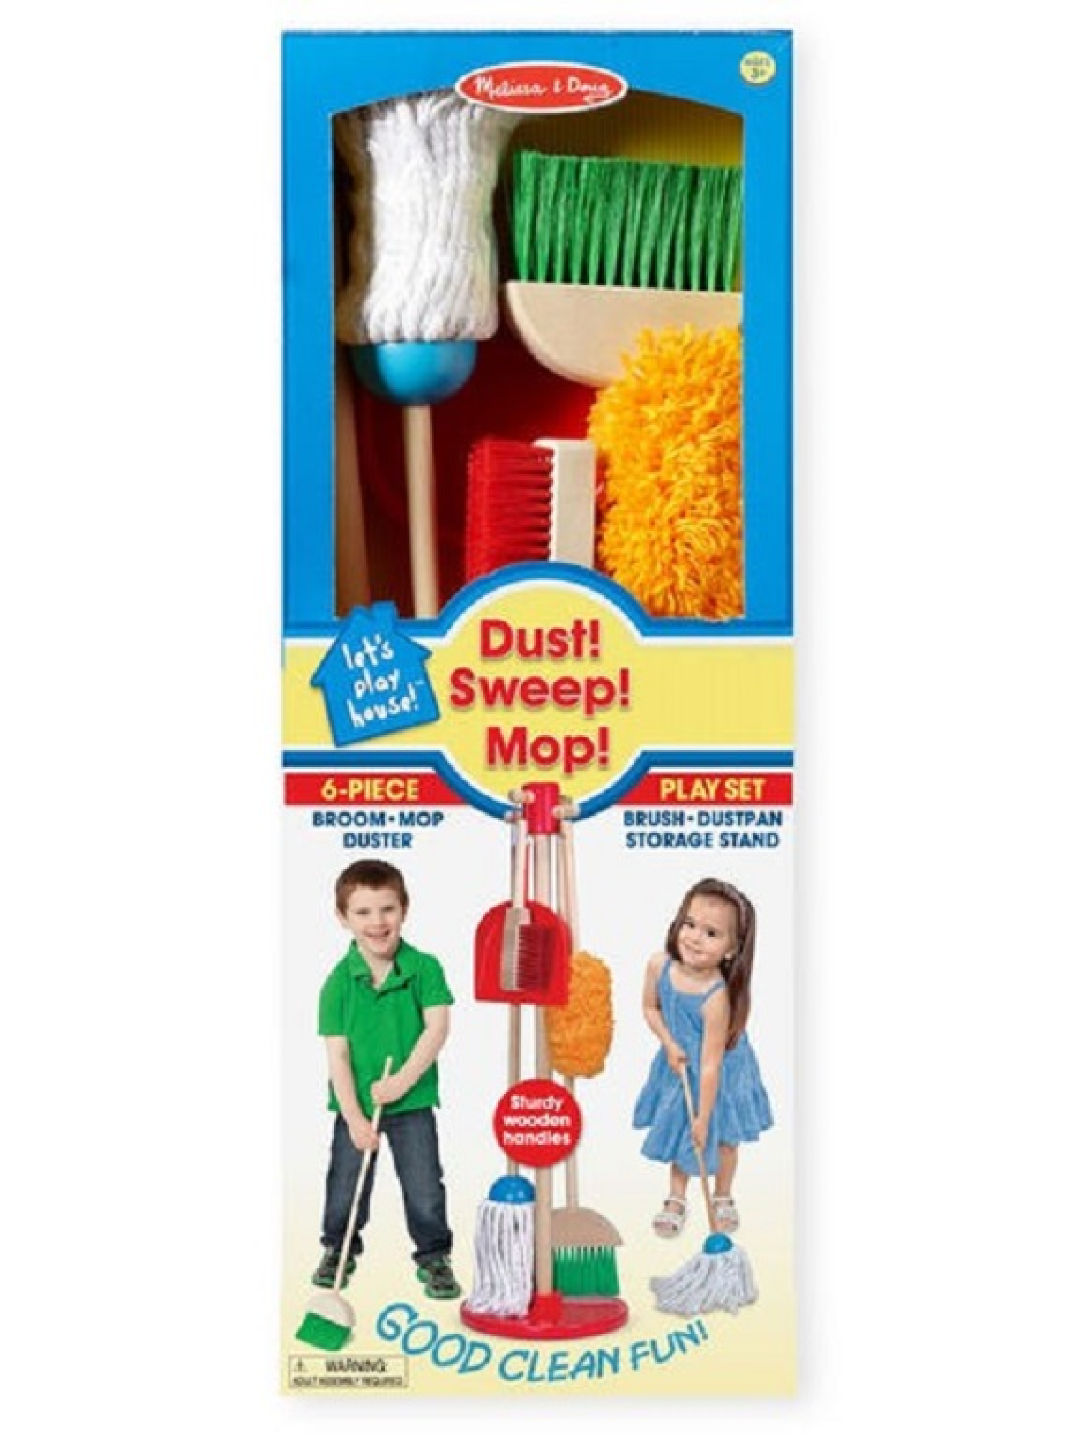 Melissa and Doug Lets Play House! Dust! Sweep! Mop!